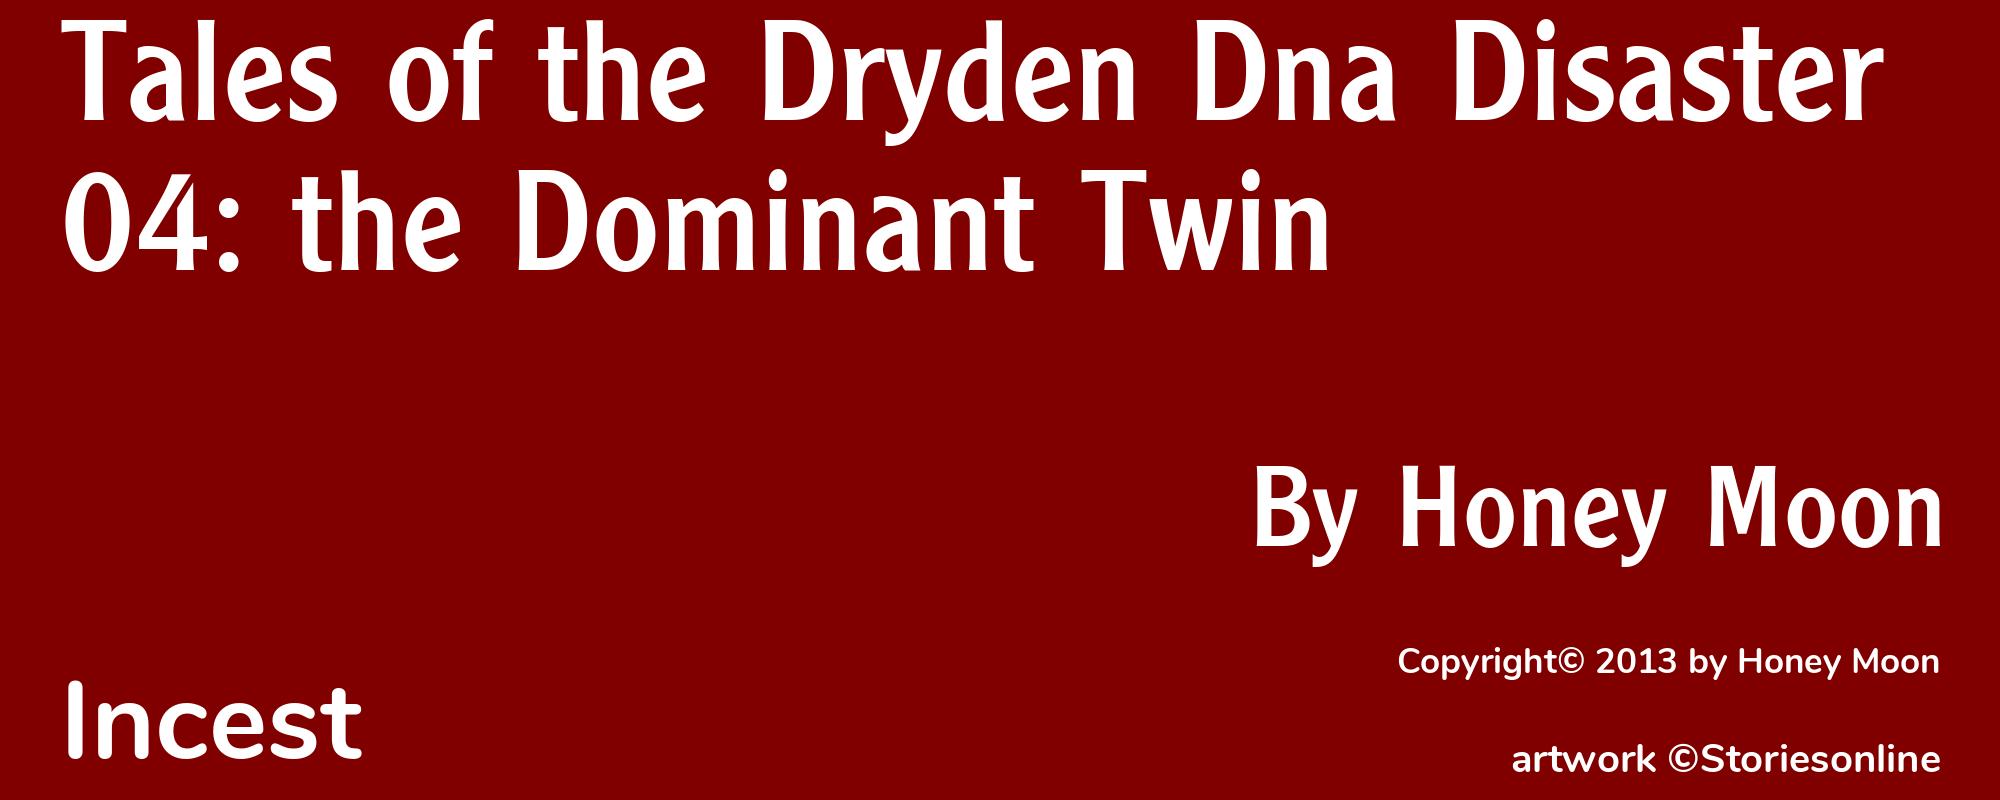 Tales of the Dryden Dna Disaster 04: the Dominant Twin - Cover